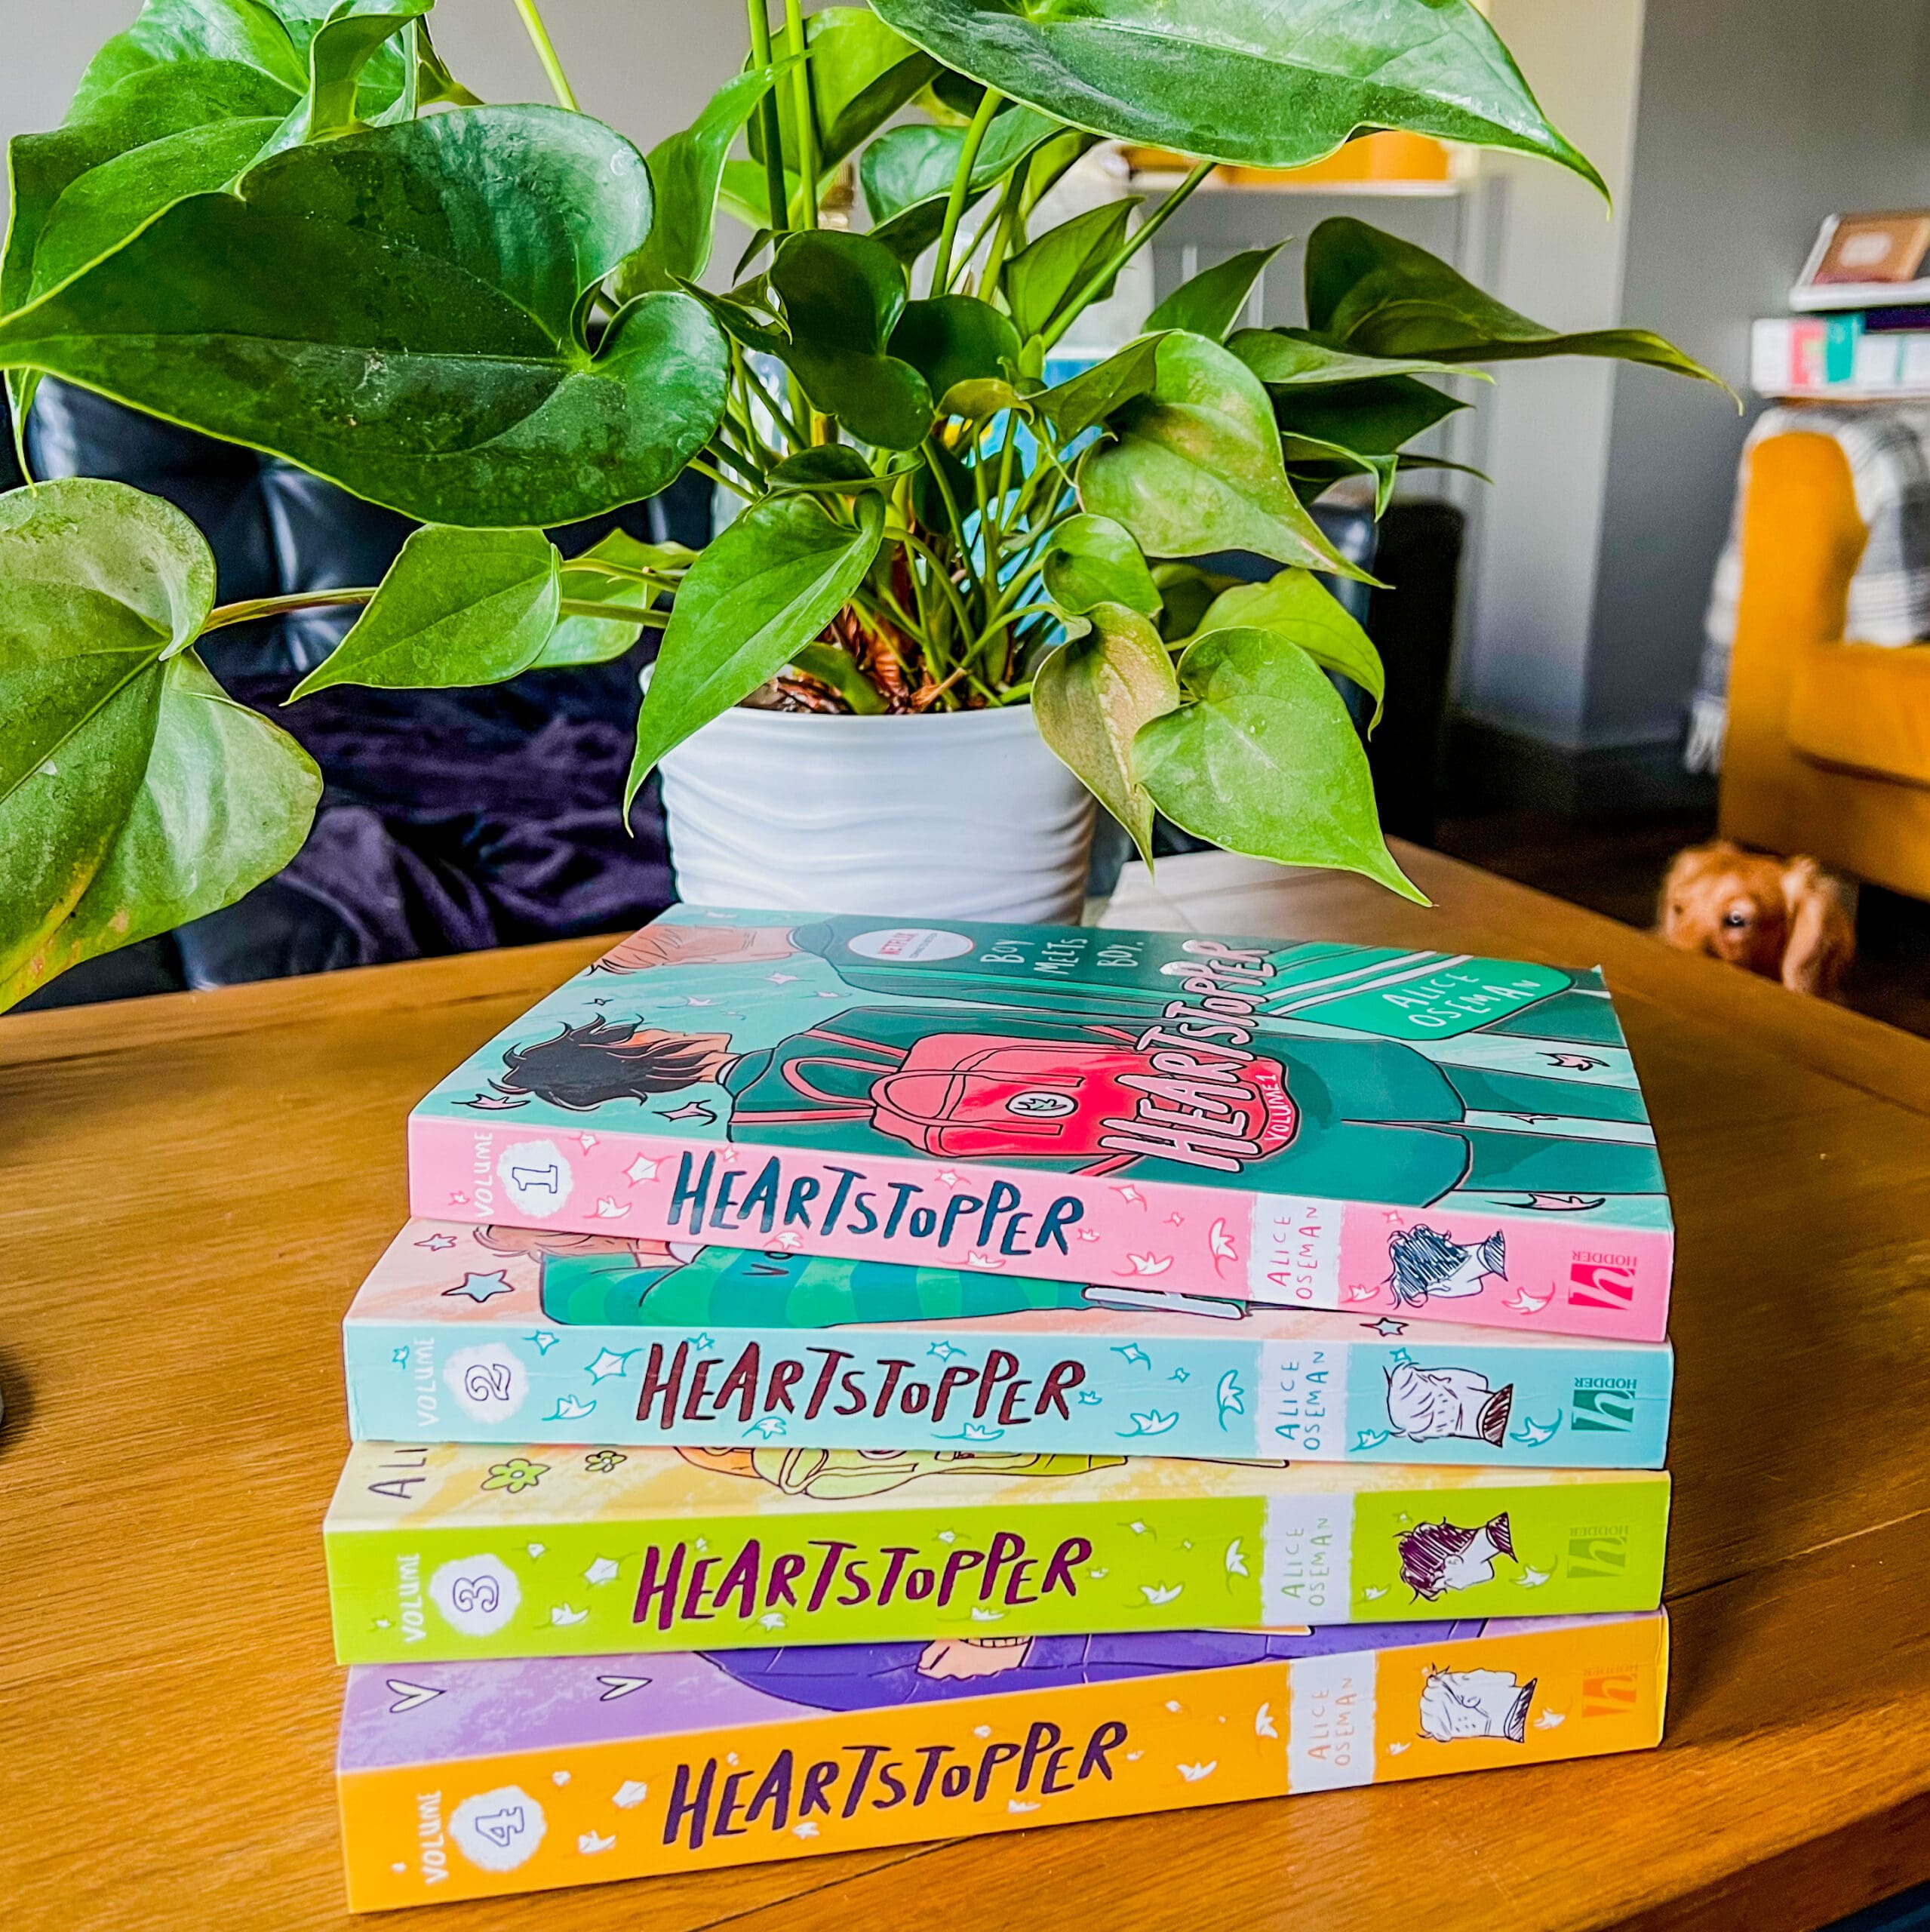 Series Review: Heartstopper Volumes 1 - 4